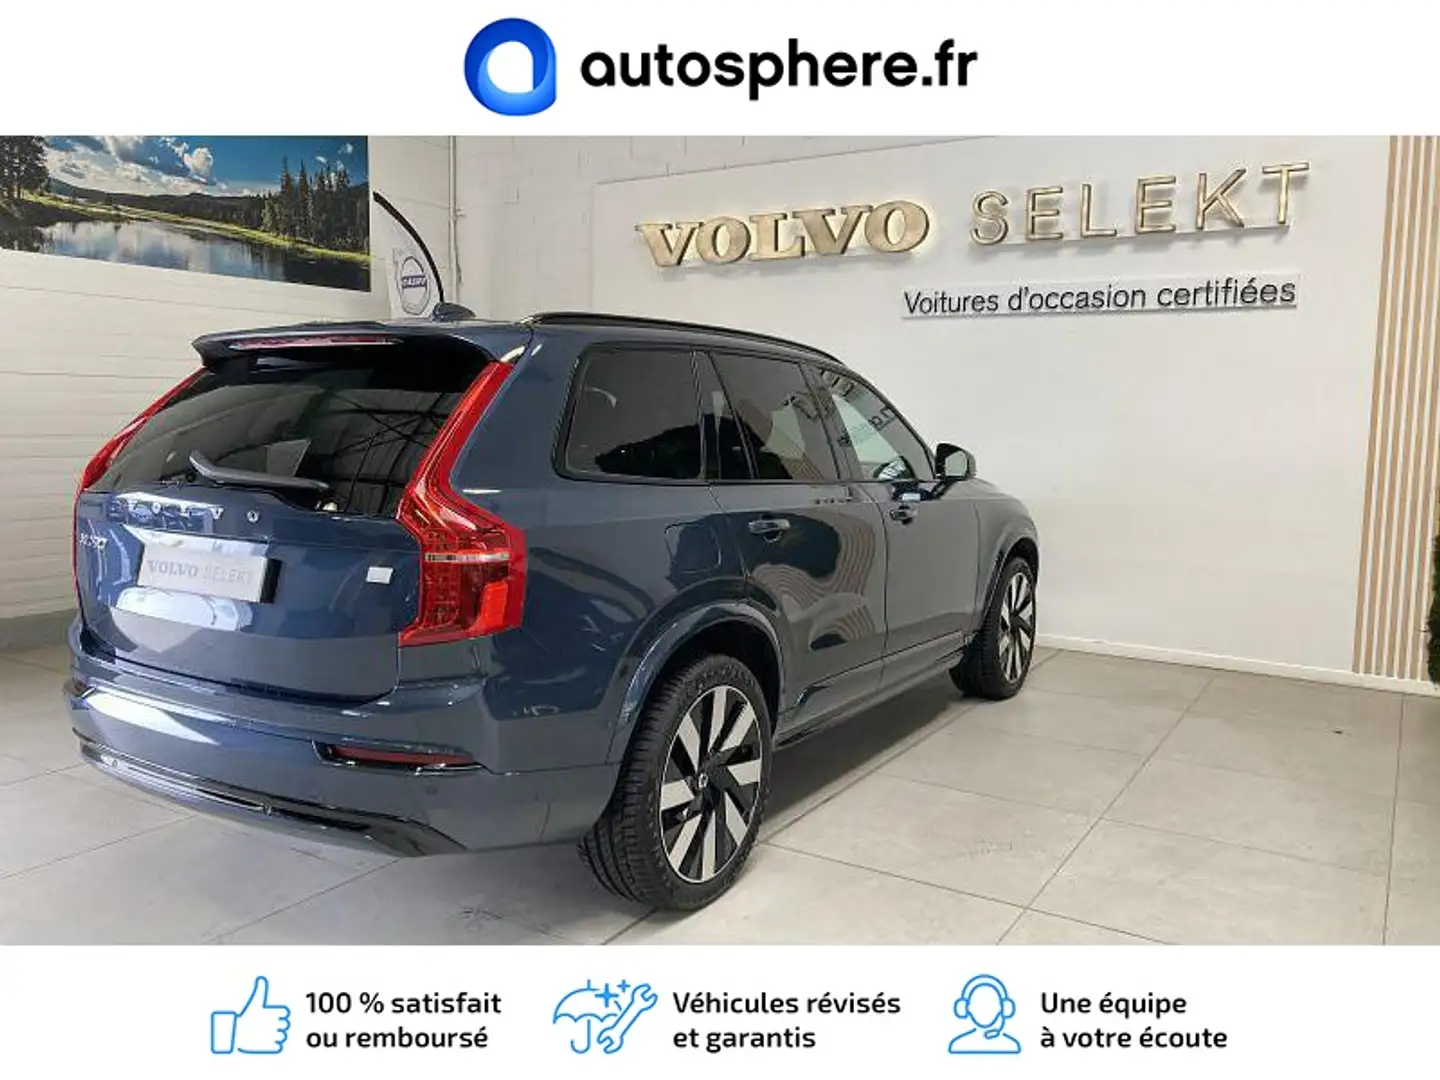 Volvo XC90 T8 AWD 310 + 145ch Ultimate Style Dark Geartronic - 2